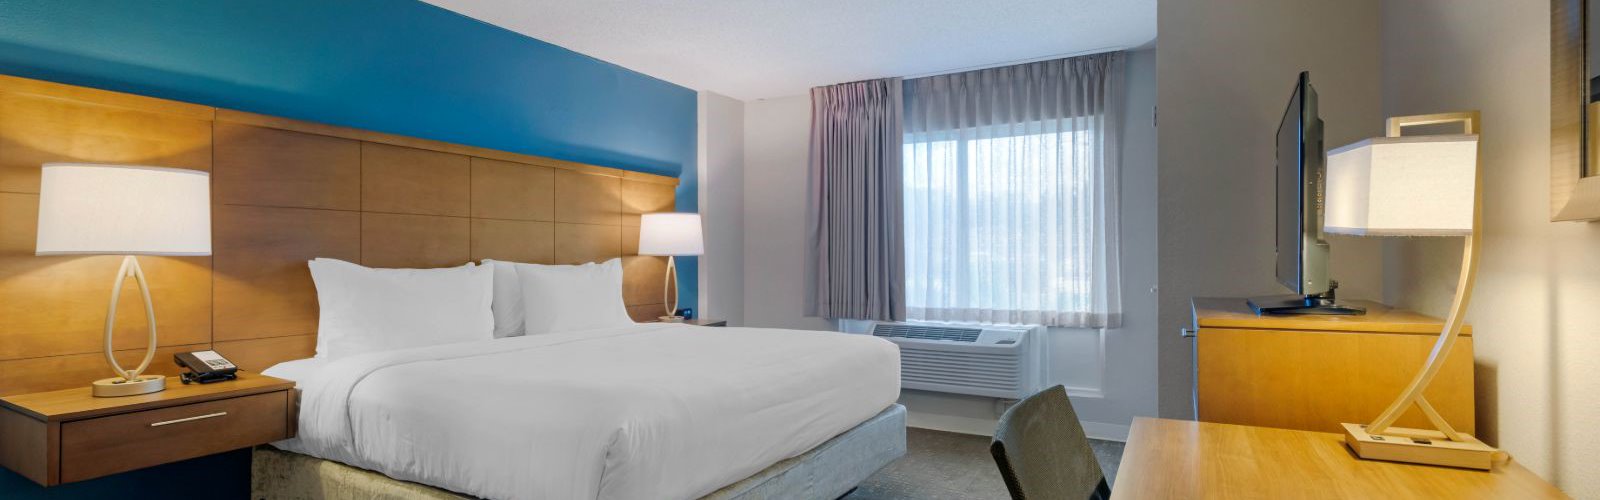 Orlando Extended Stay Hotels in Kissimmee, Florida